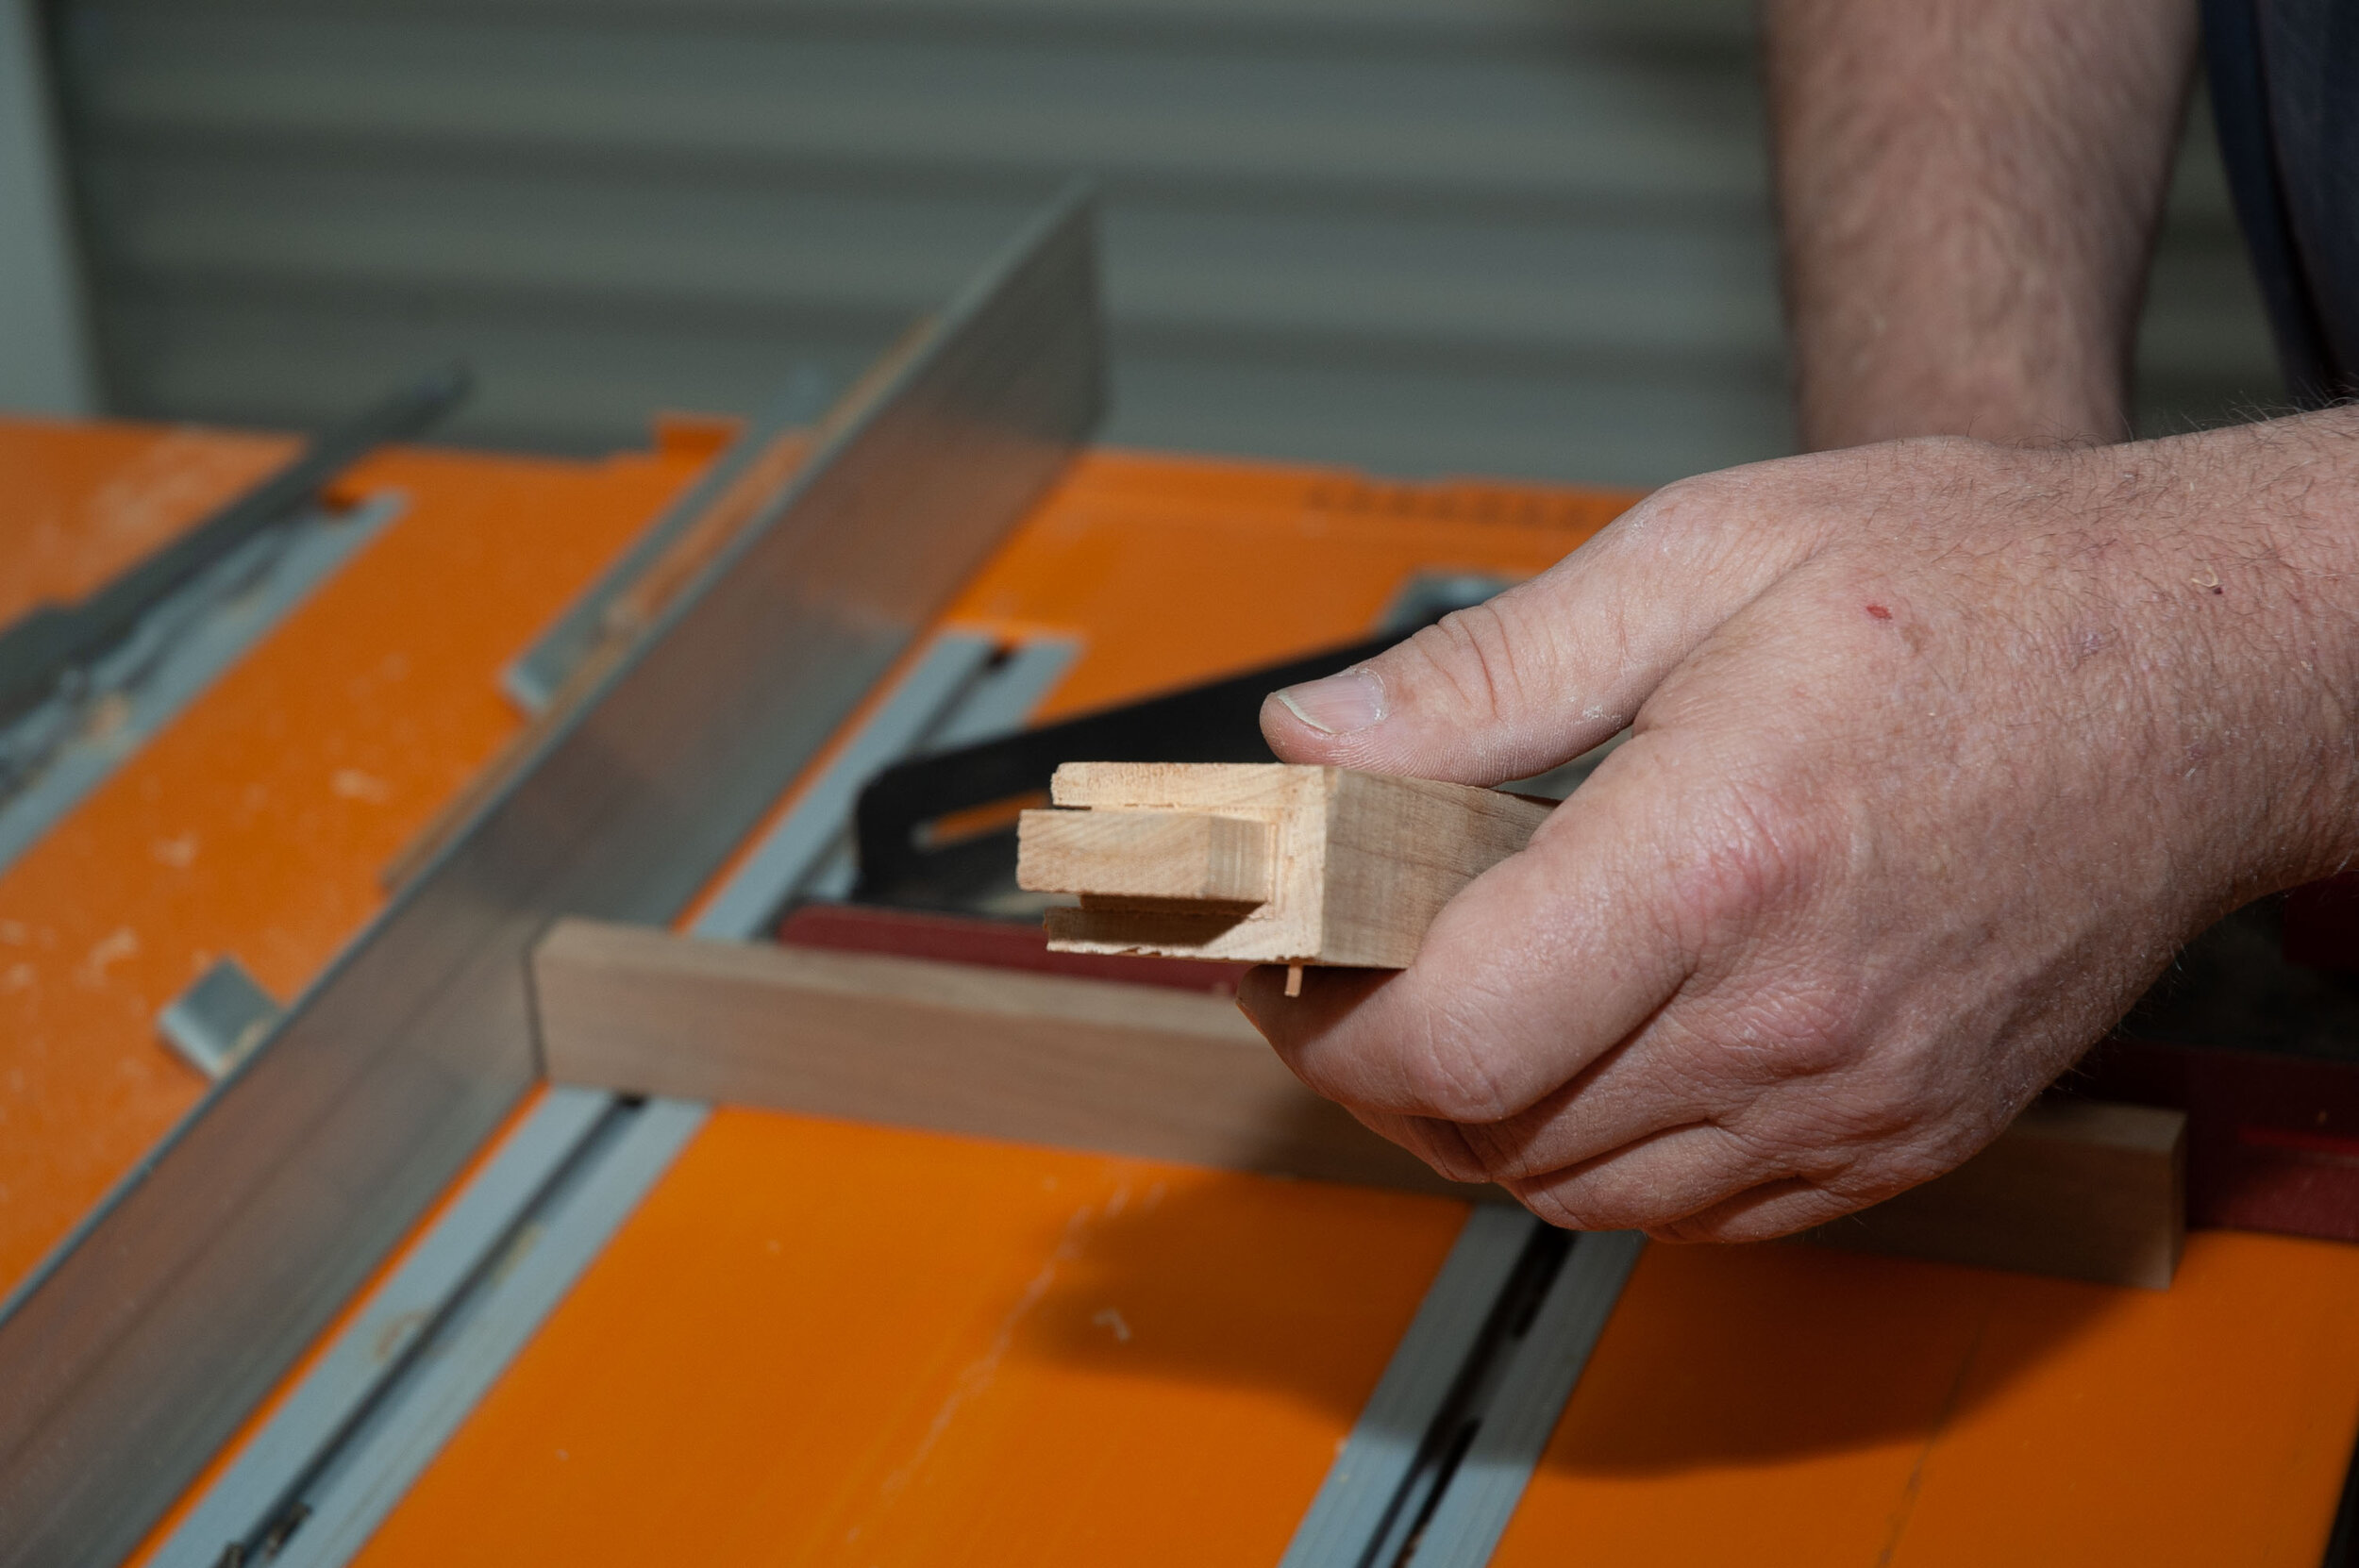 Tenon cut on the table saw